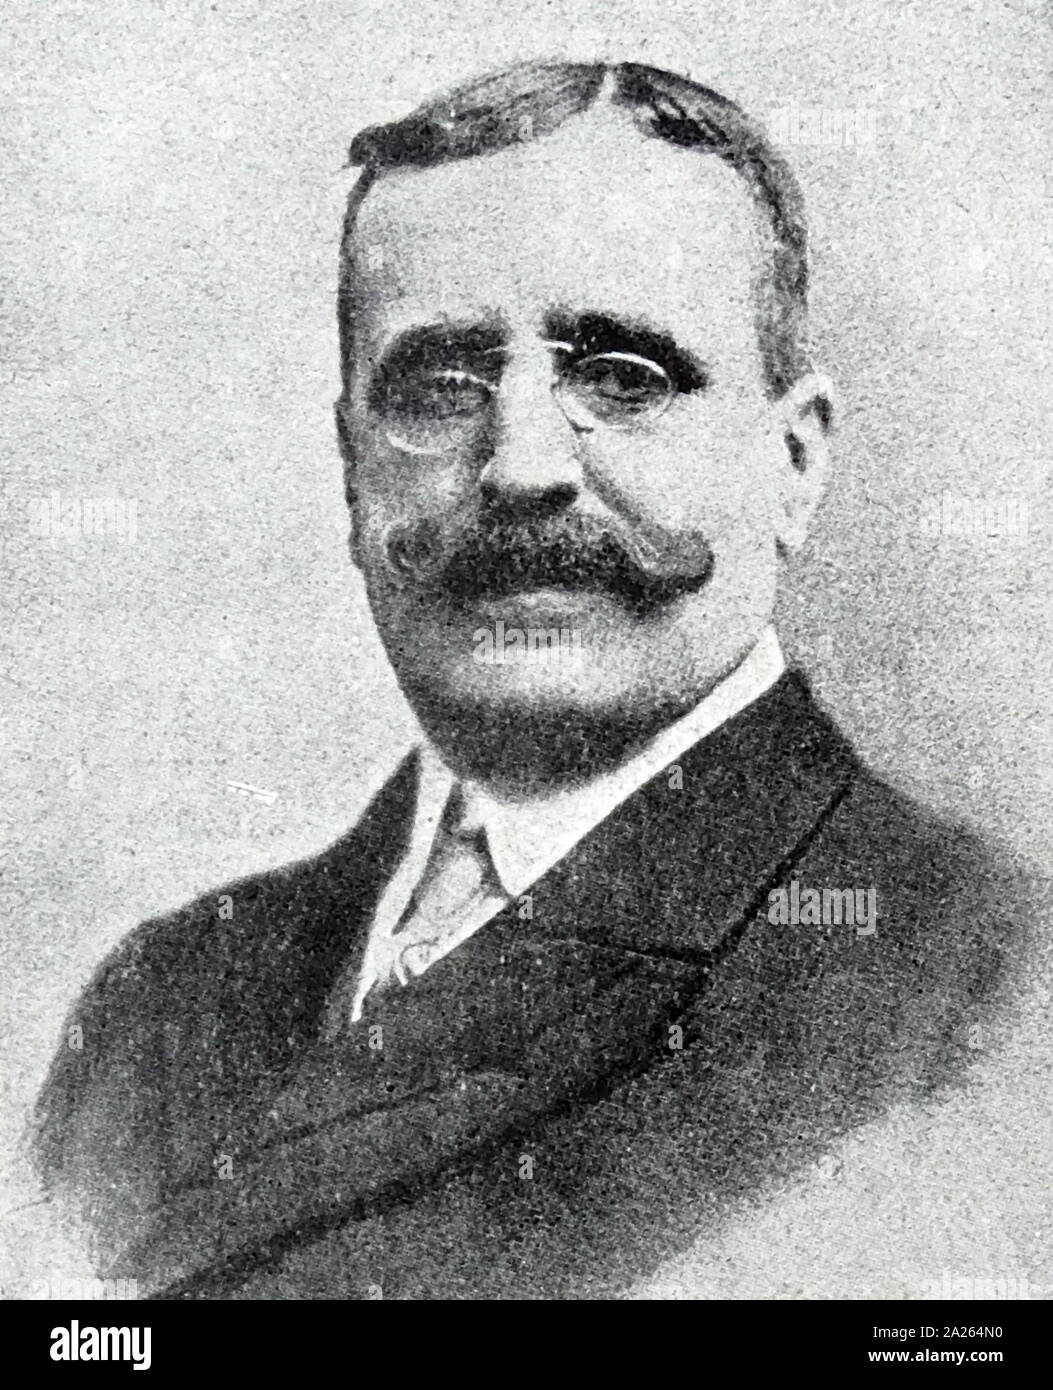 Jose Canalejas y Mendez (31 July 1854 – 12 November 1912) was a Spanish politician, born in Ferrol, who served as Prime Minister of Spain. Stock Photo